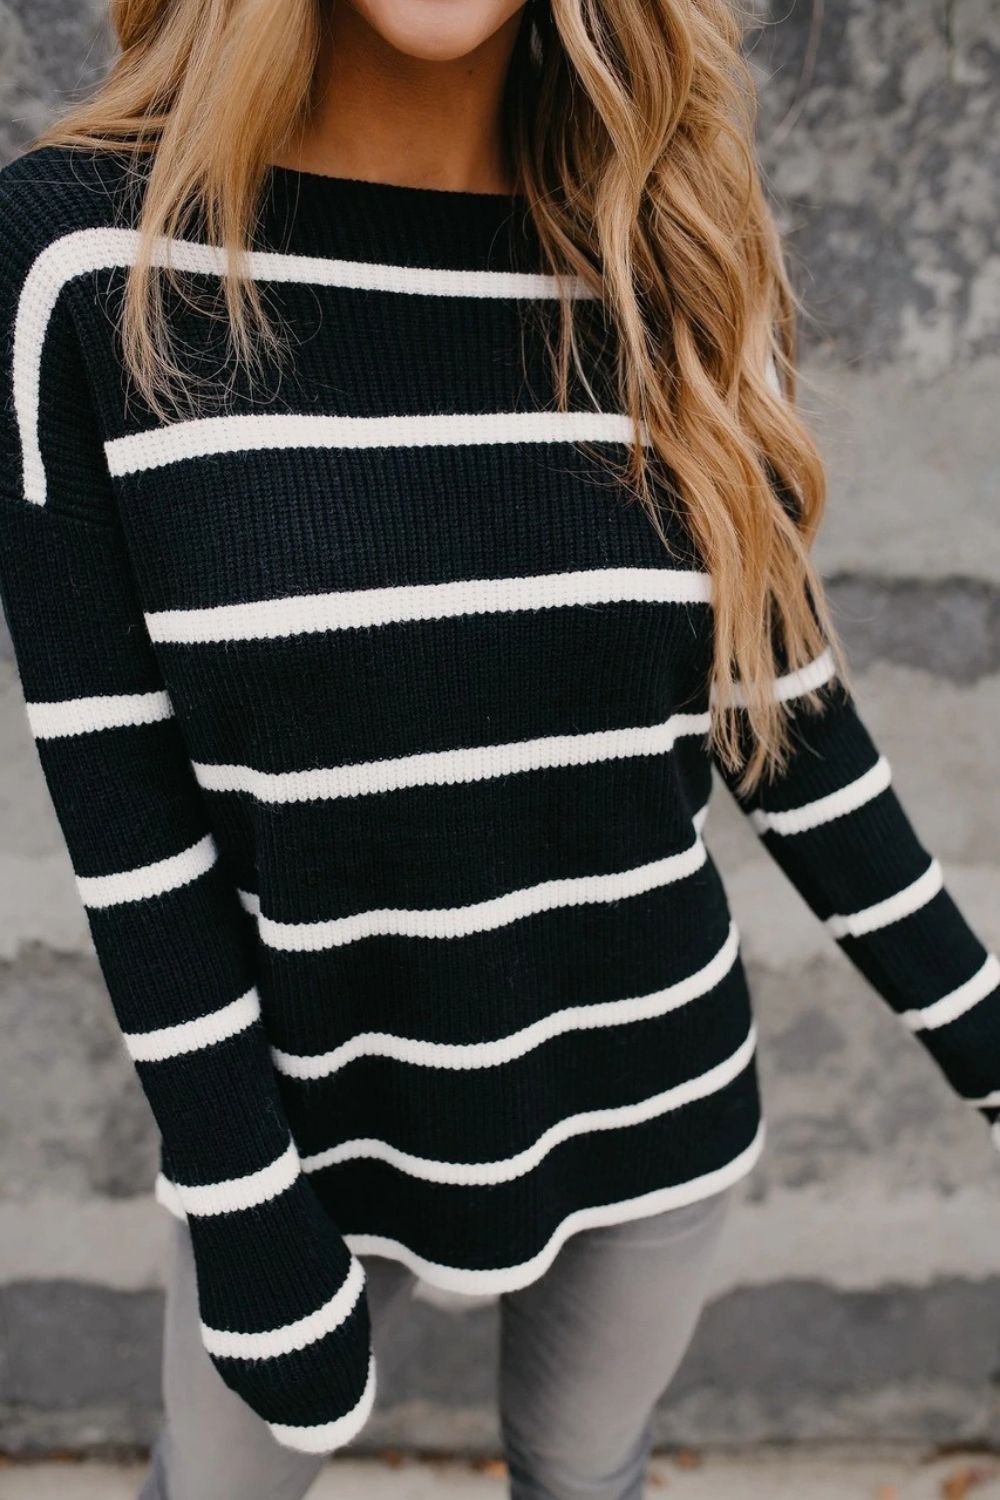 2021 Autumn And Winter Women'S New Solid Color Striped Sweater Top Casual Striped Loose Round Neck Sweater